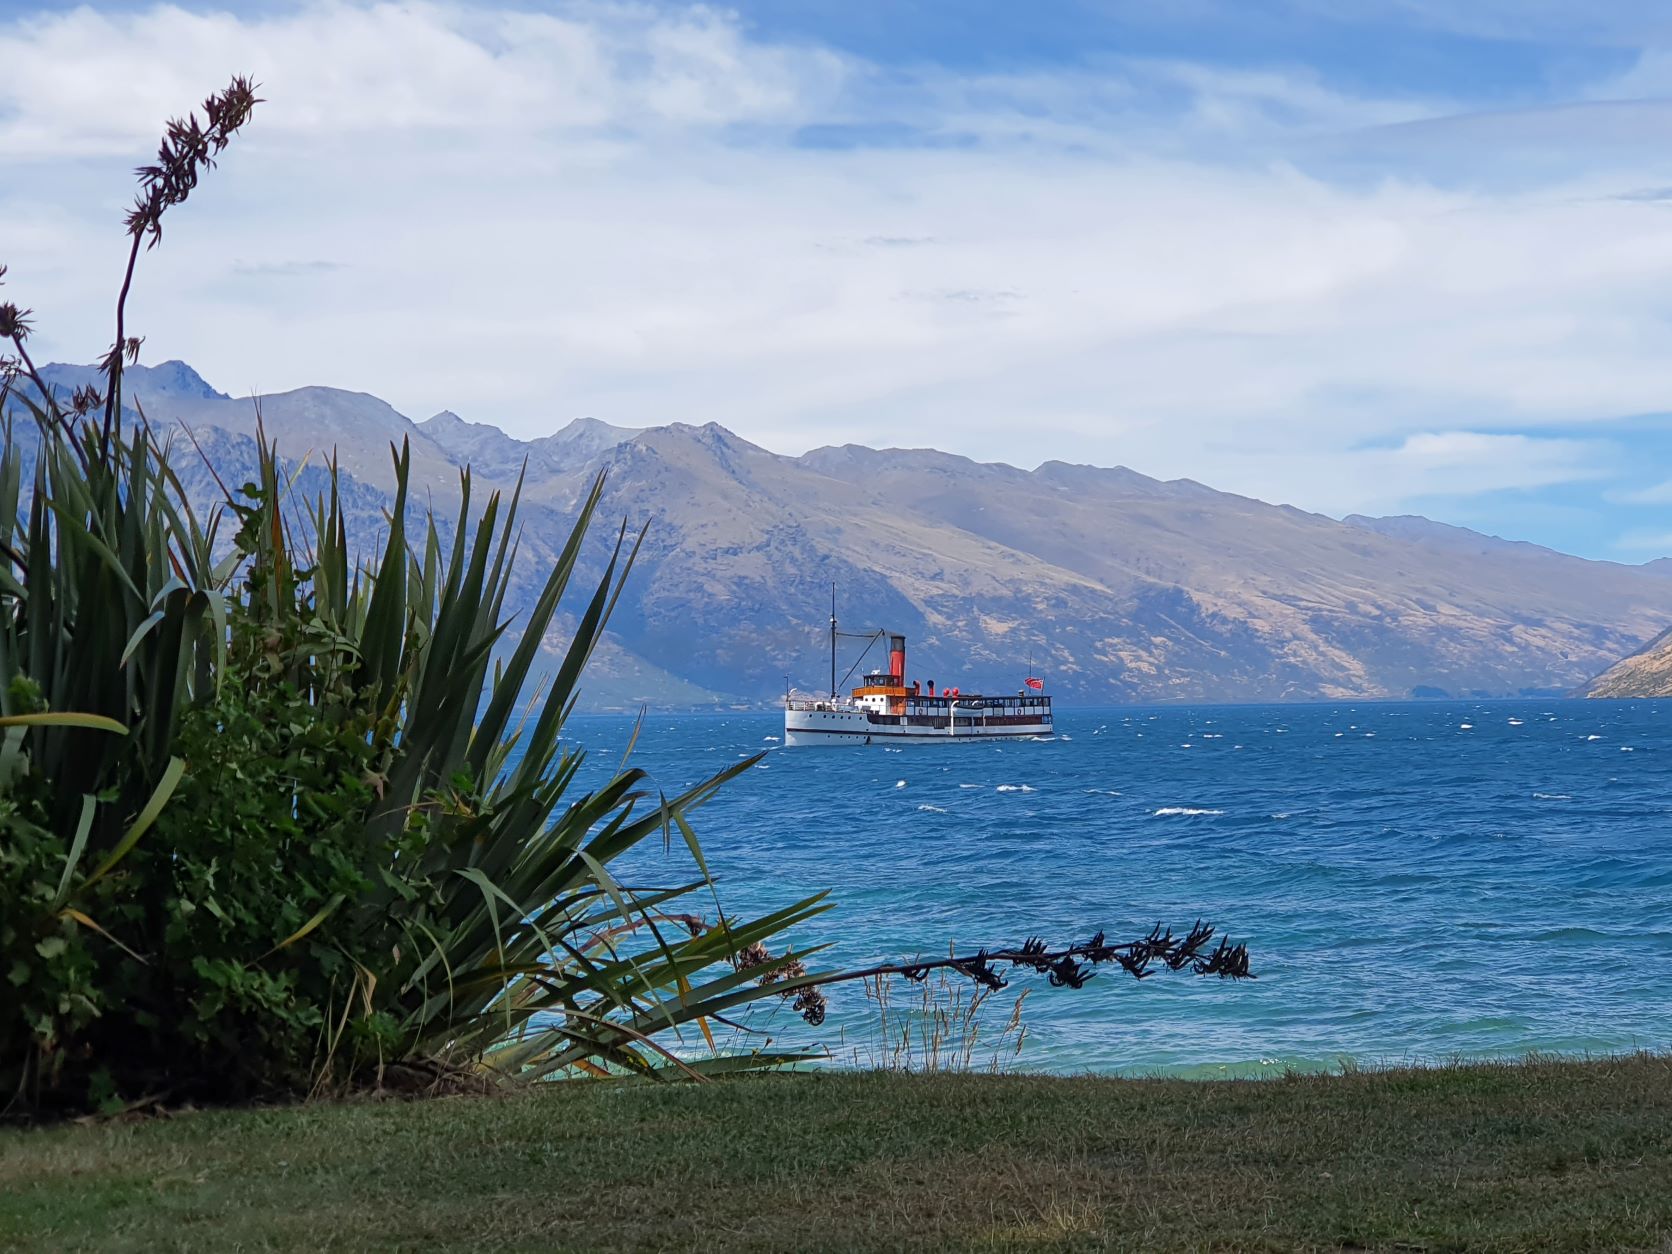 TSS Earnslaw steamship as seen from the banks of Lake Queenstown